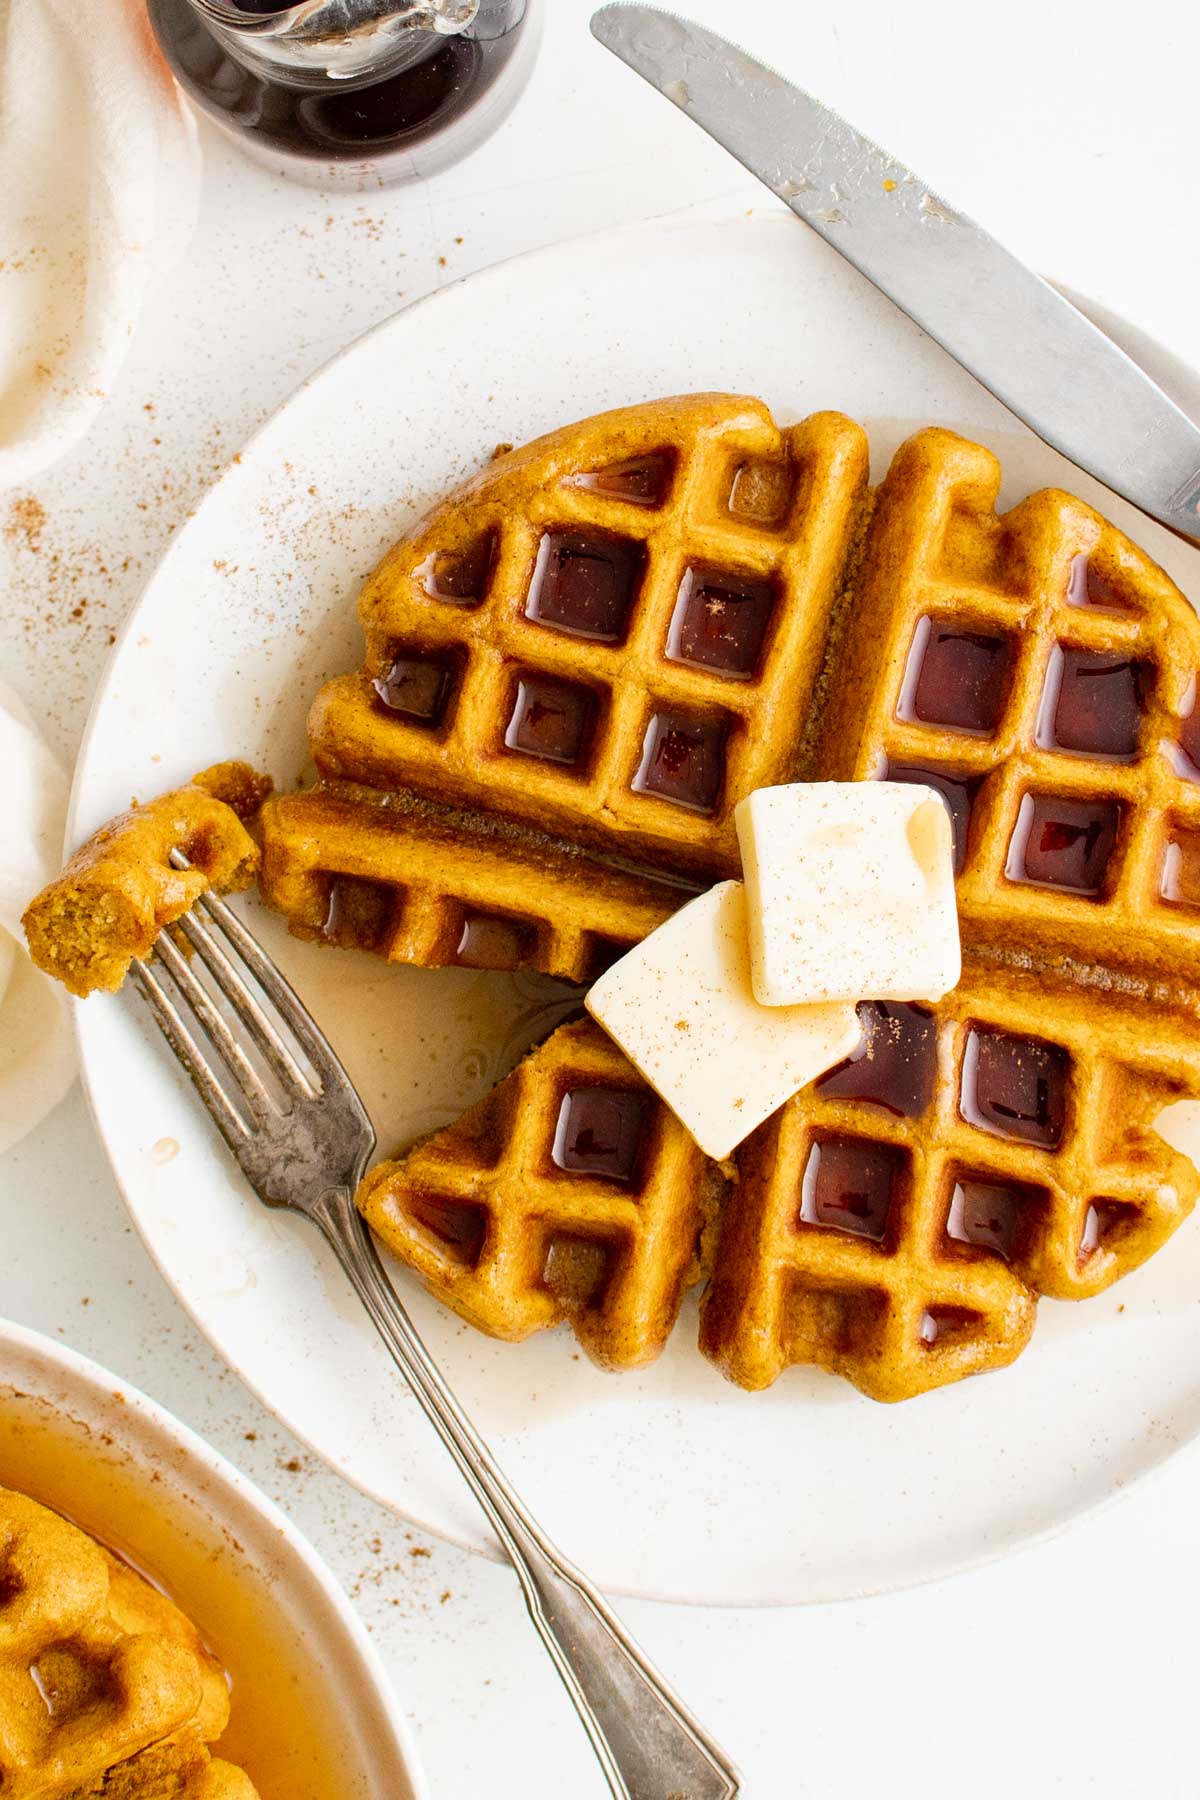 A waffle on a plate with pats of butter, cinnamon and a fork.